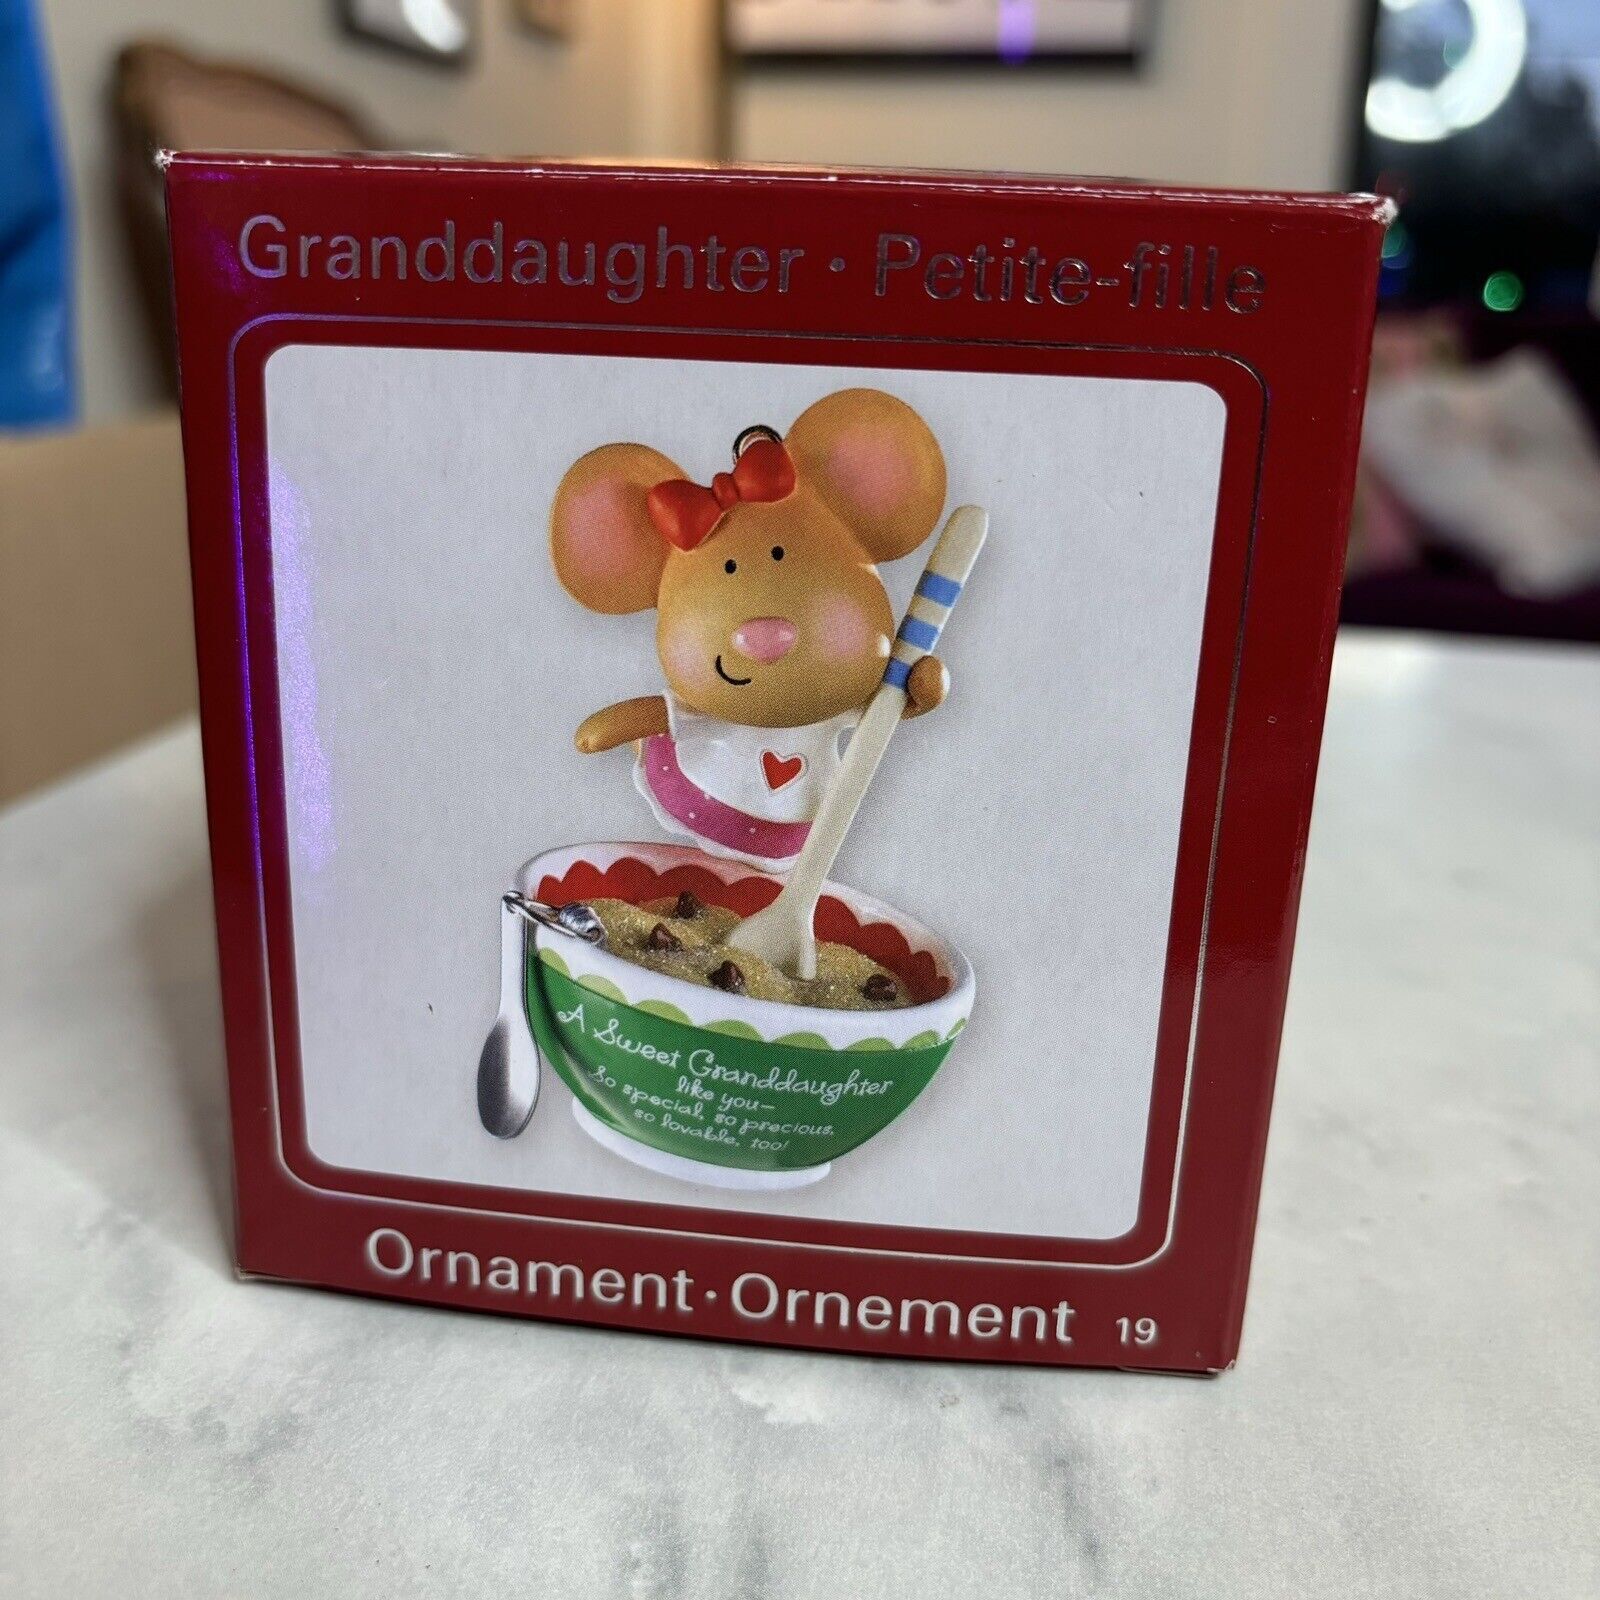 Heirloom Ornament Collection Granddaughter Petite American Greetings 2009 NEW